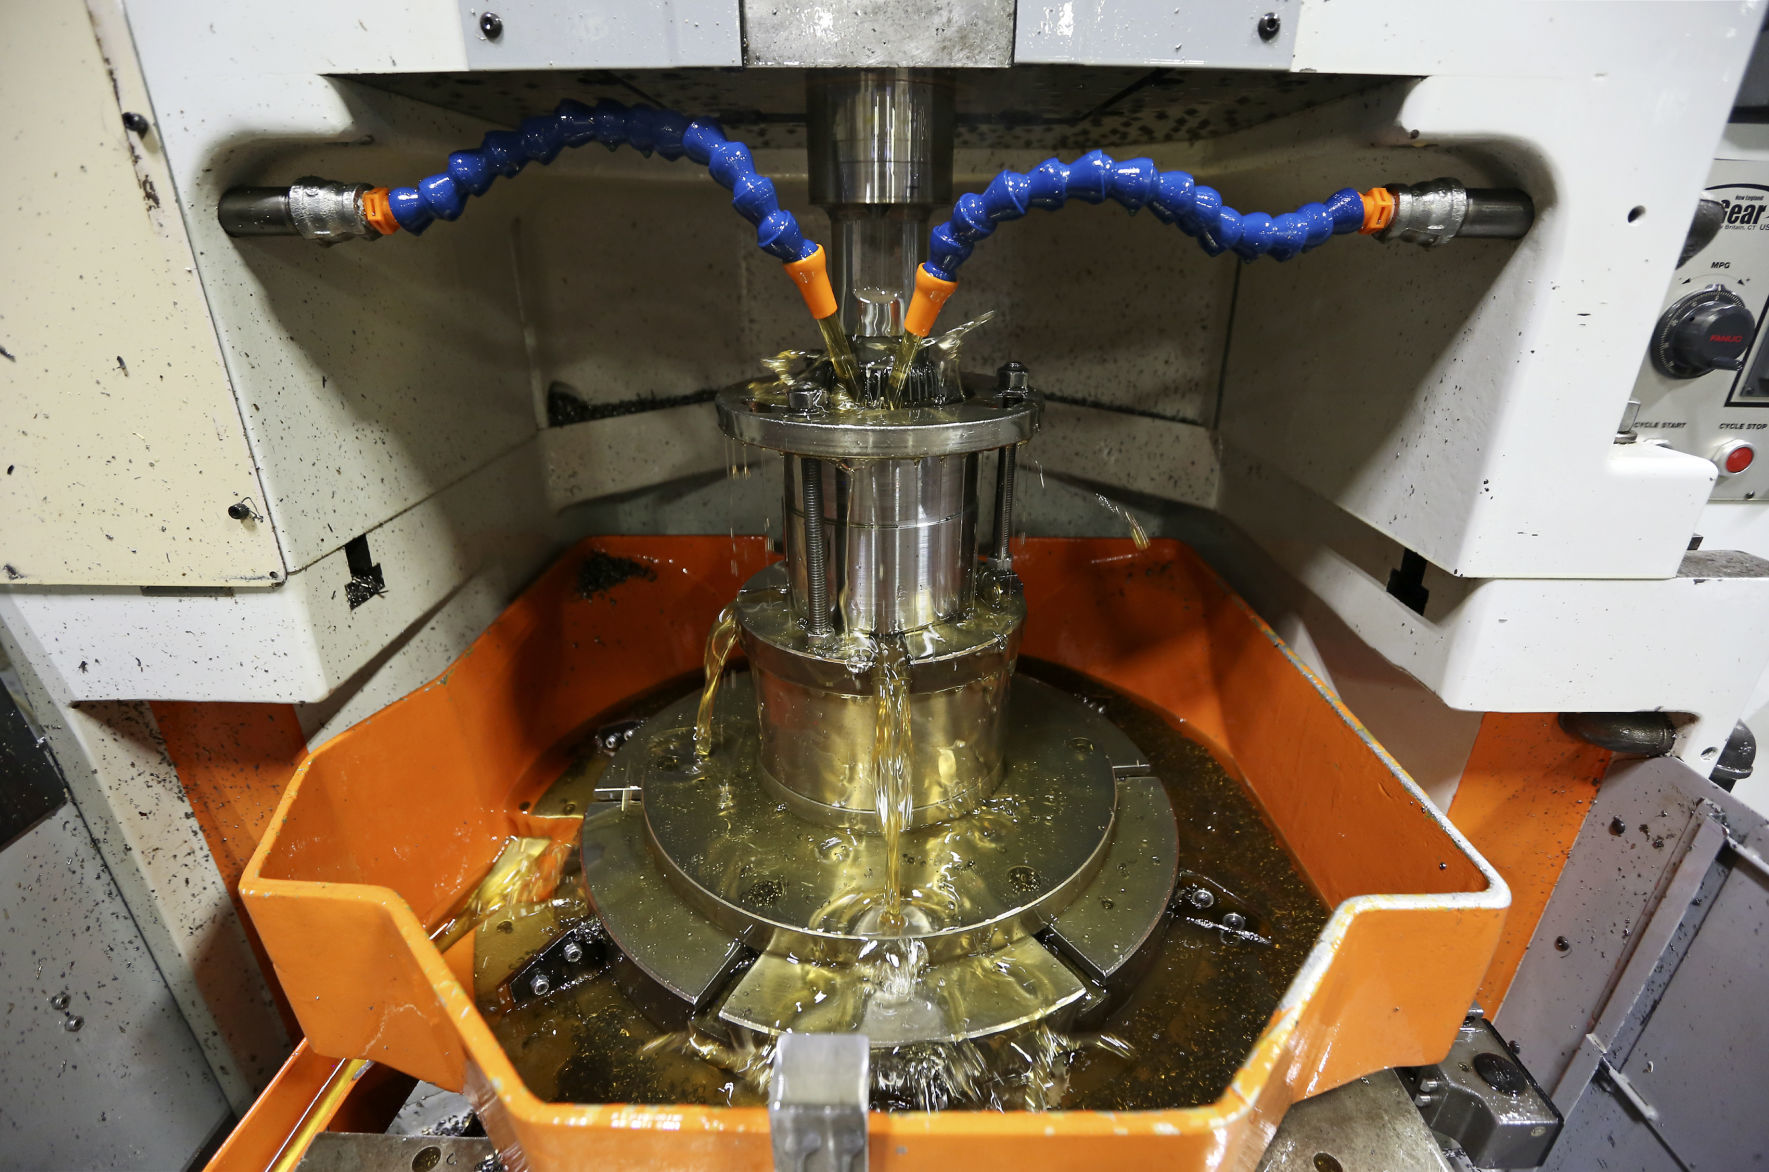 Oil cools an internal spline being shaped by a machine at The Adams Company in Dubuque.    PHOTO CREDIT: Nicki Kohl
Telegraph Herald